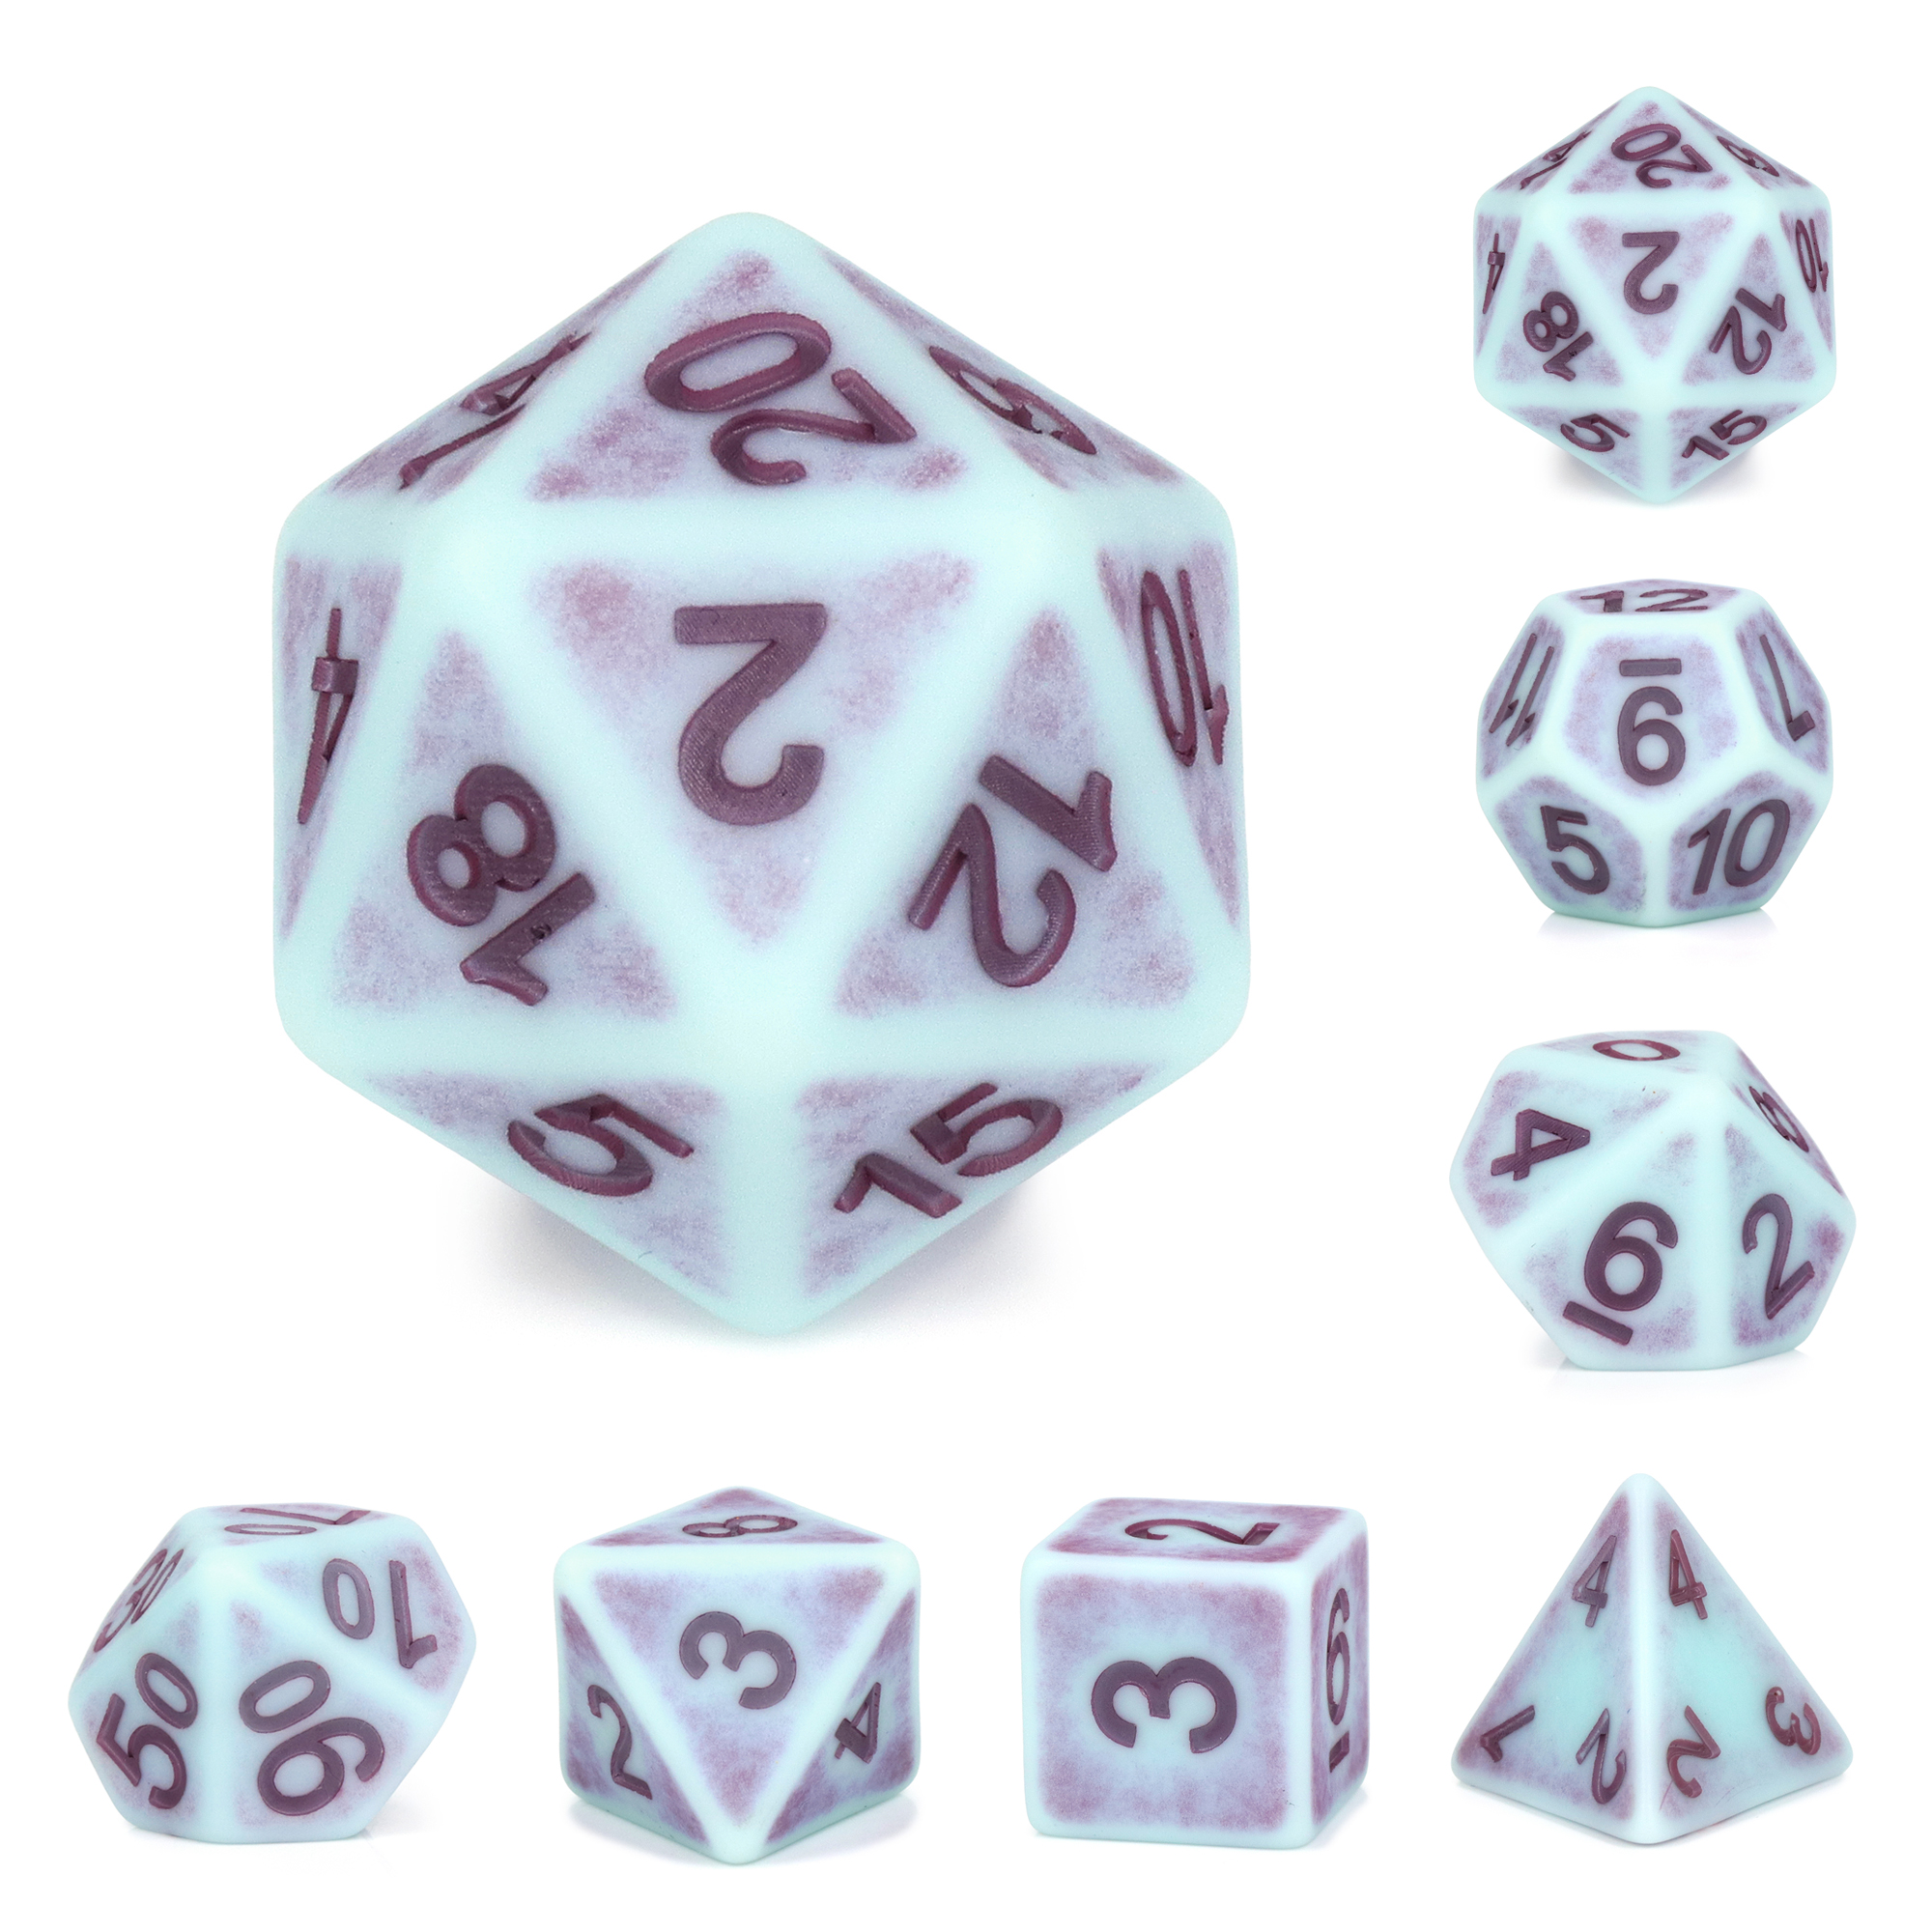 HDI-18 Evils Dice ~ 7 piece Polyhedral dice set ~ NEW RPG DnD Magic